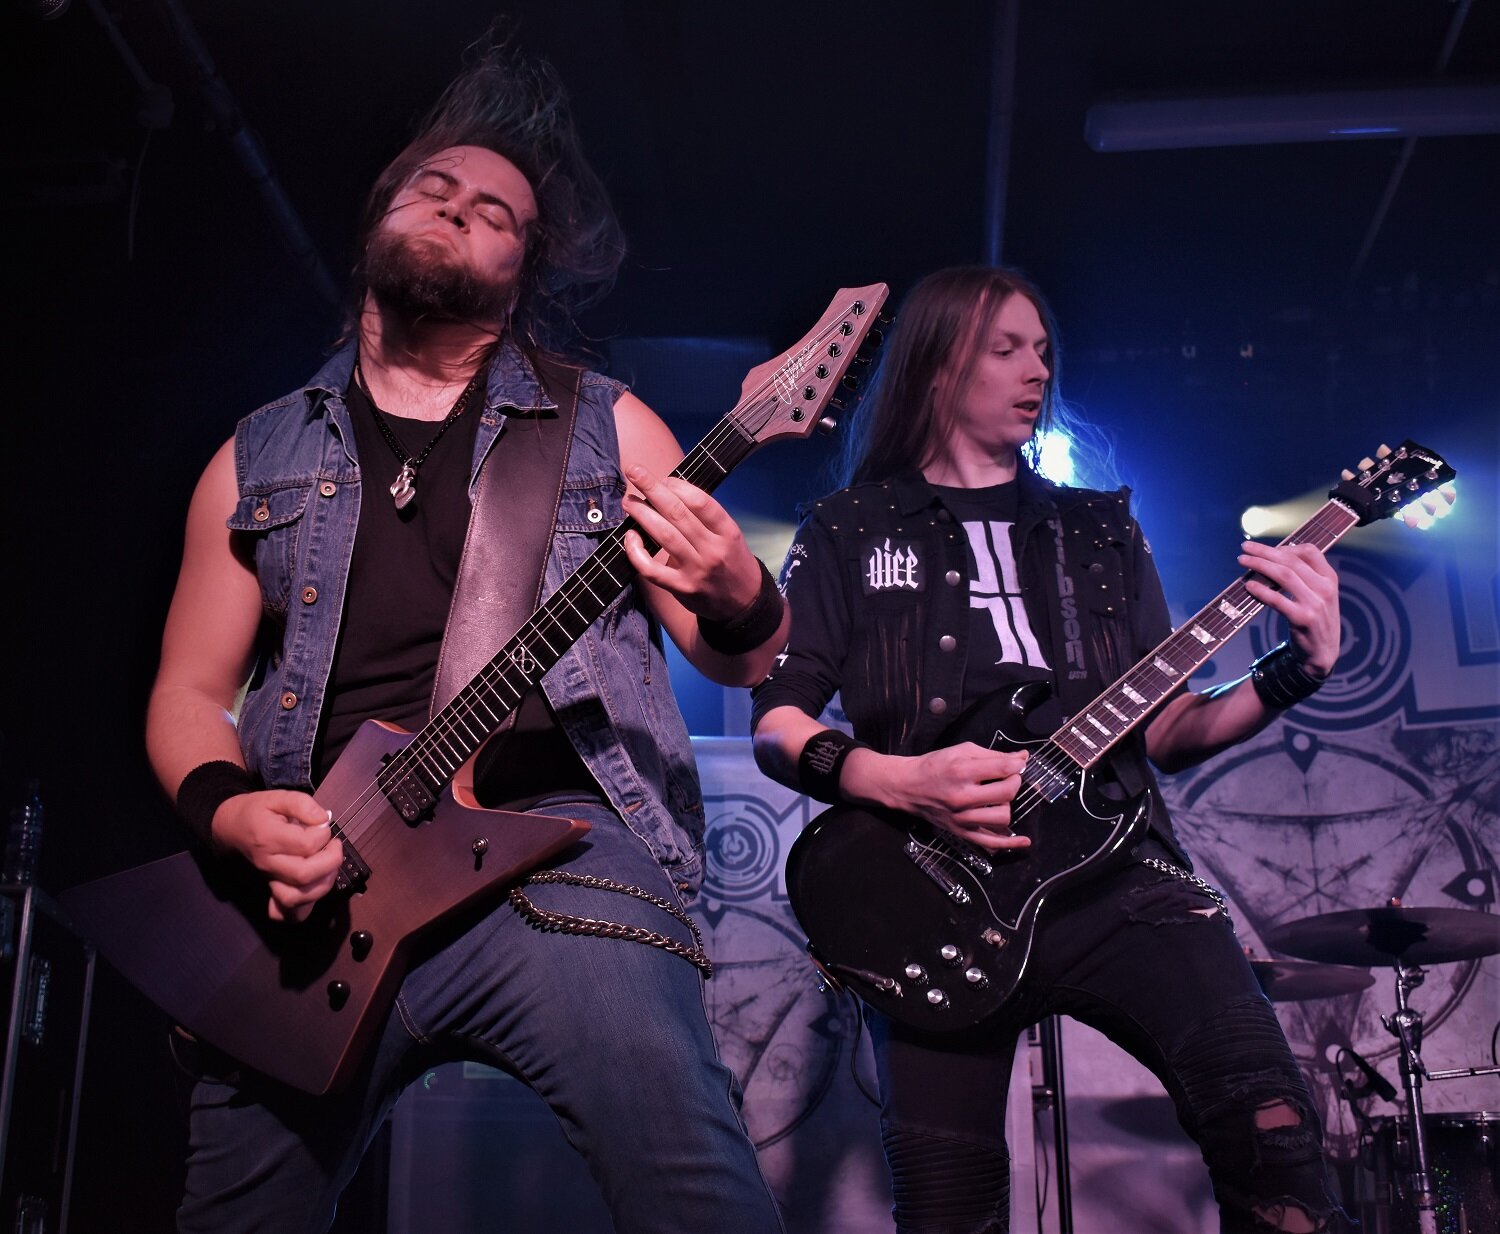 Absolva at the Academy 3 in Manchester on December 21st 2019